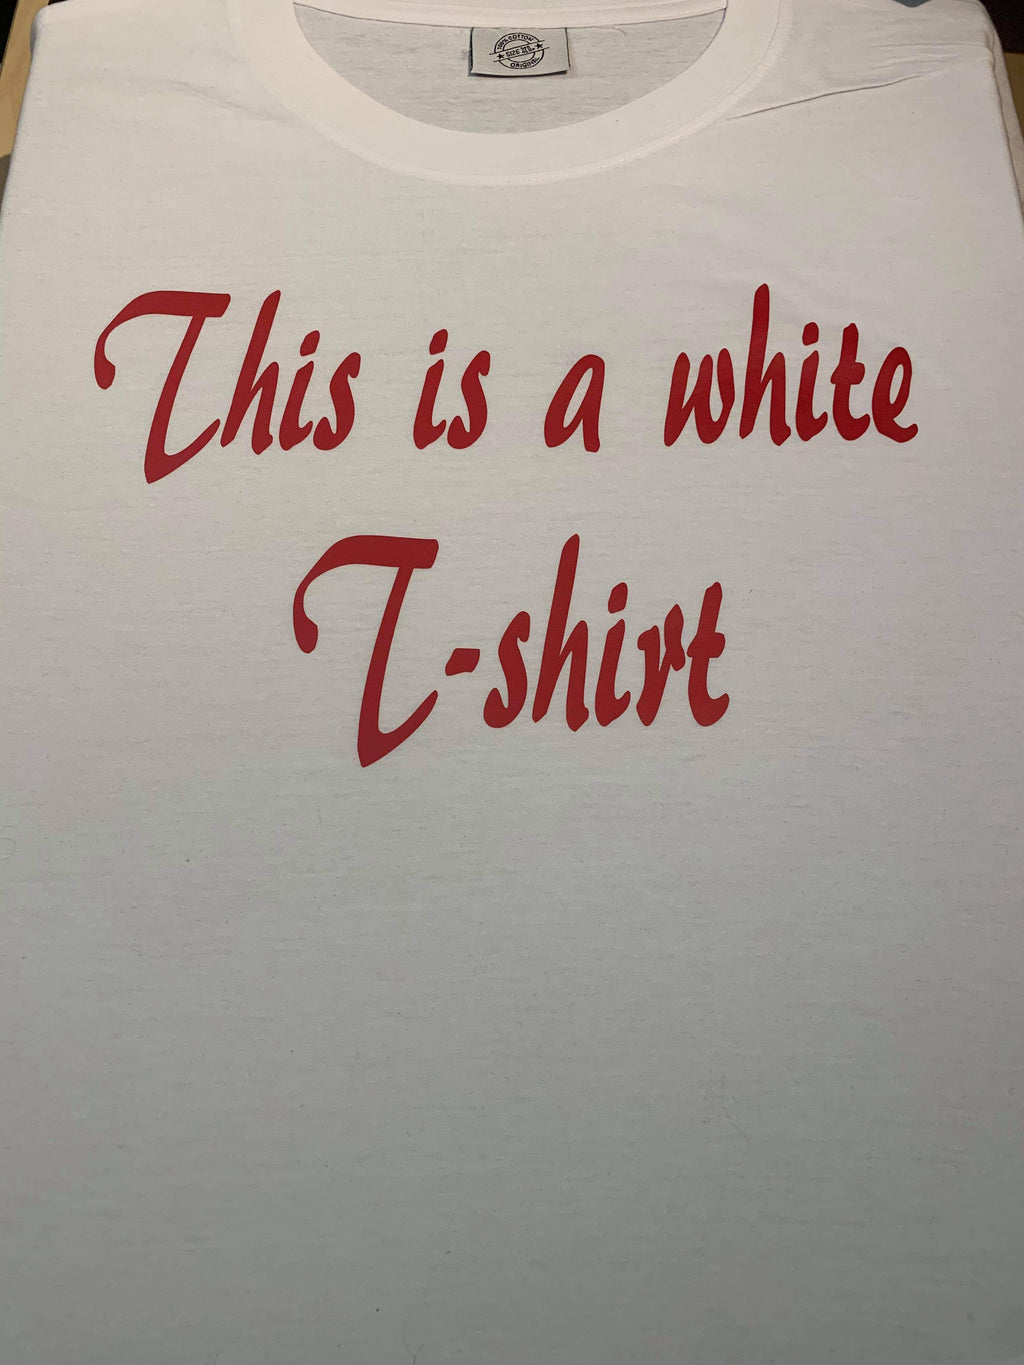 This is a white t-shirt